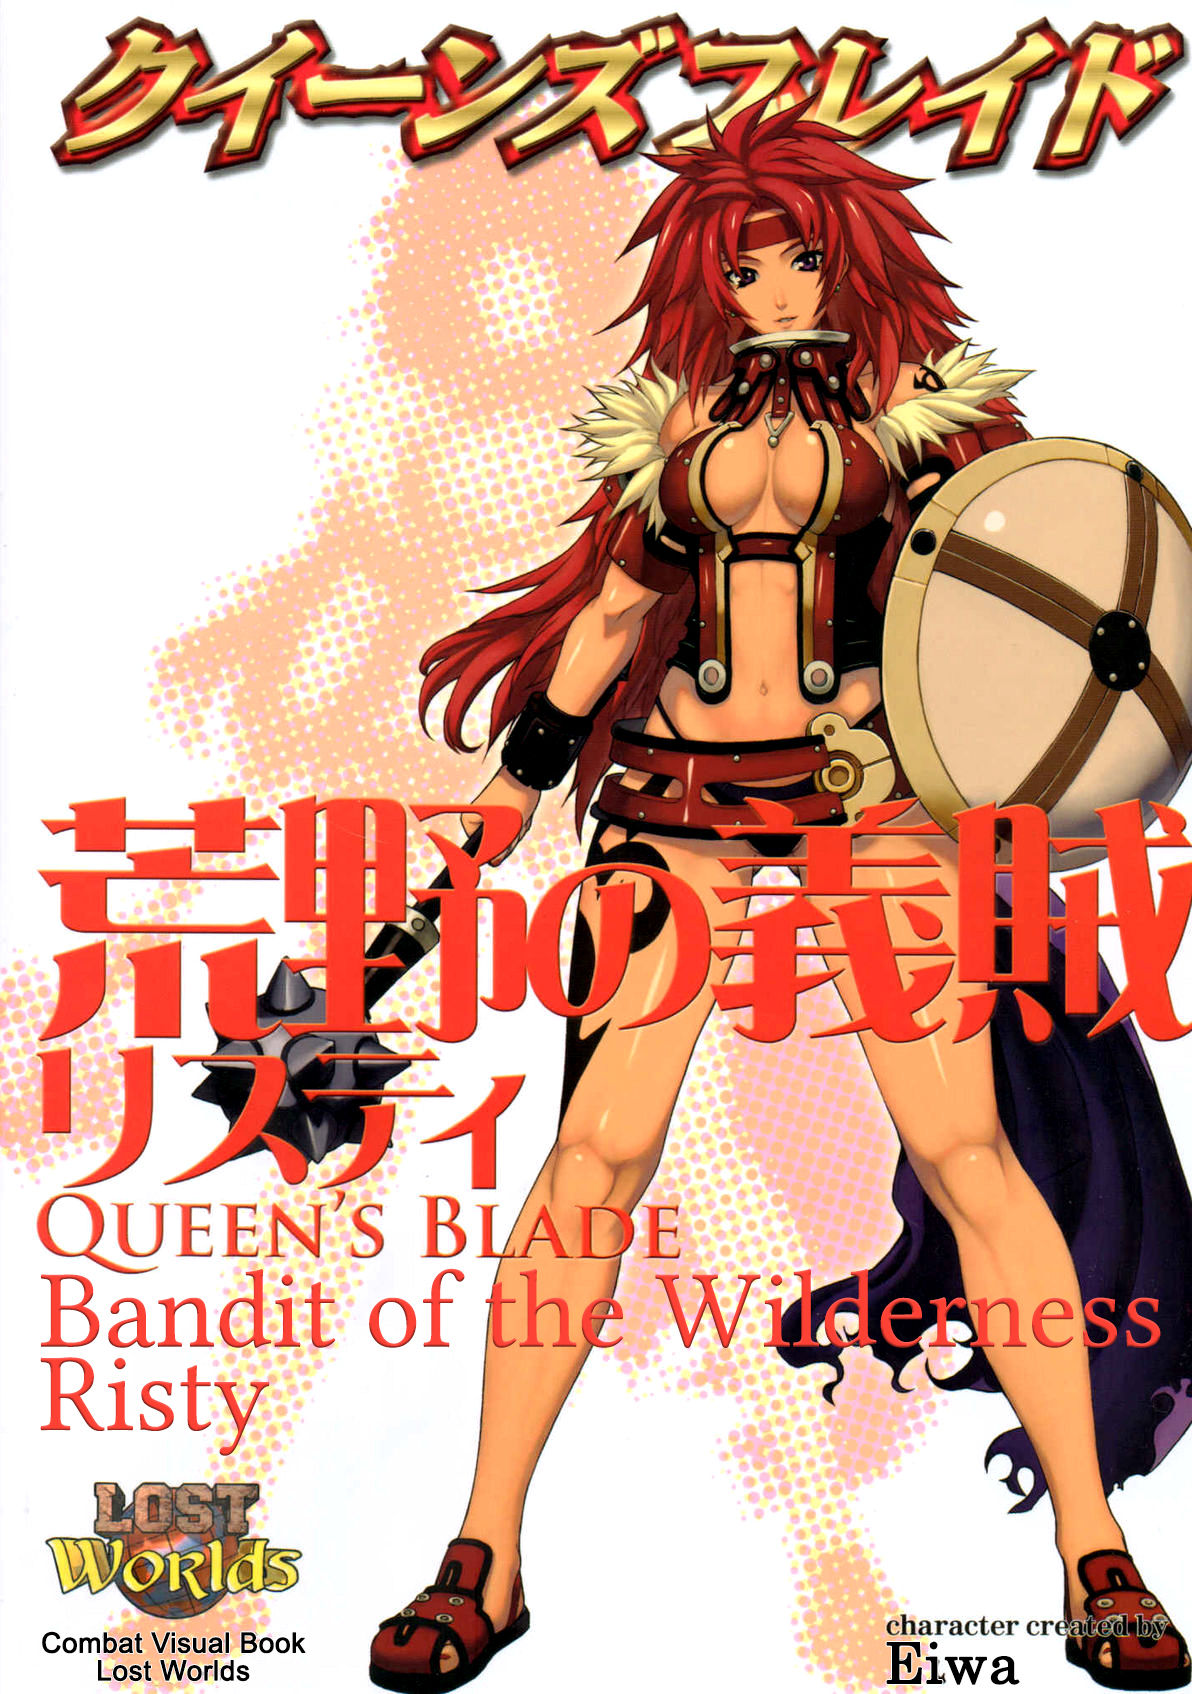 queens blade bandit of the wilderness risty english 00